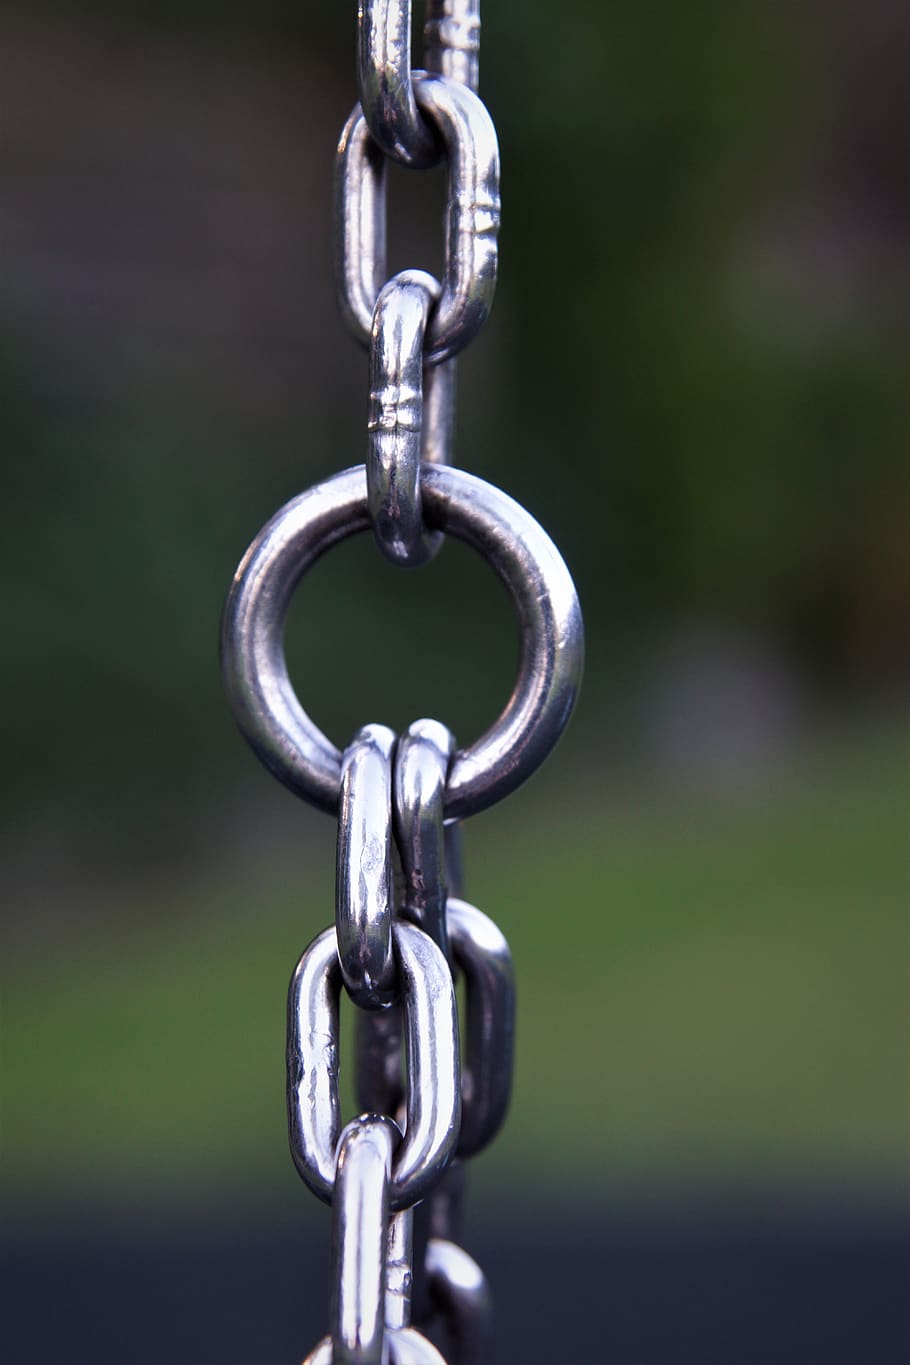 chain, iron, links of the chain, metal, shine, close-up, connection, strength, focus on foreground, day